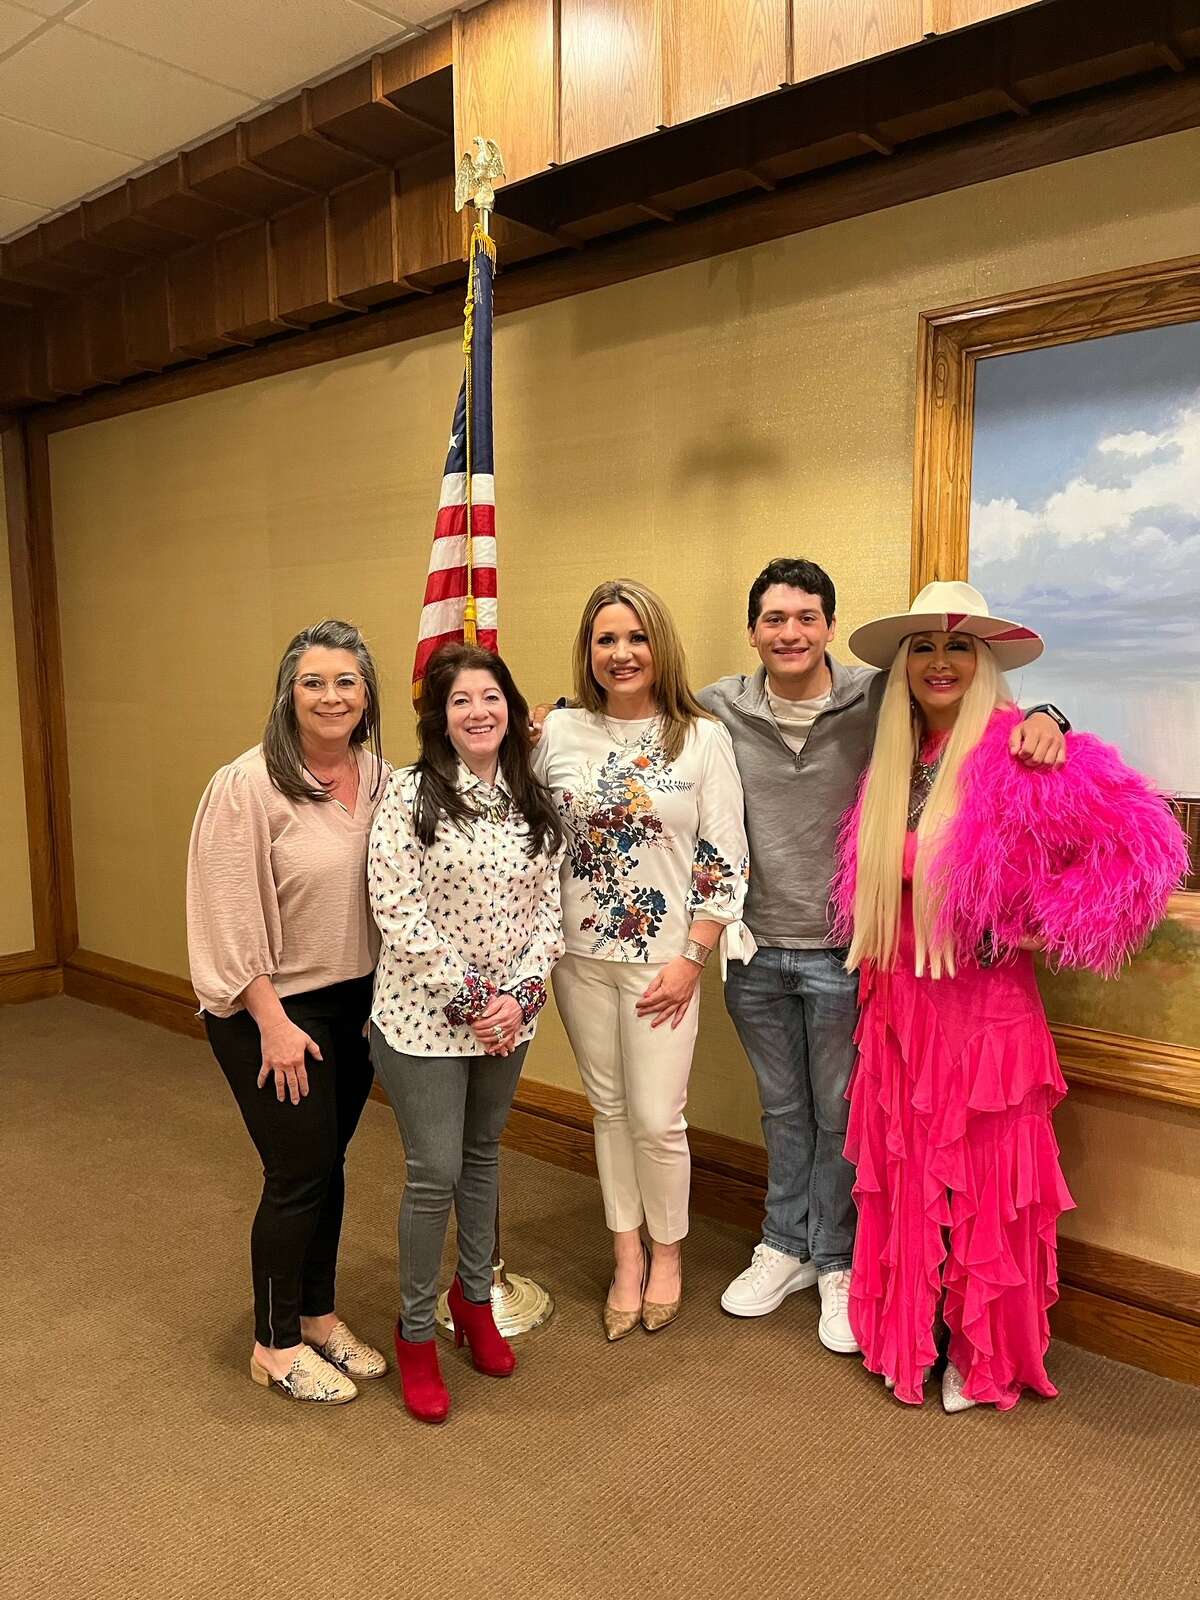 From left to right:Misty Stewart, BPW president, Annette Dozier, BPW vice president, Shonna Garcia, Connor Garcia and Donna Bruno, BPW Publicity chairman